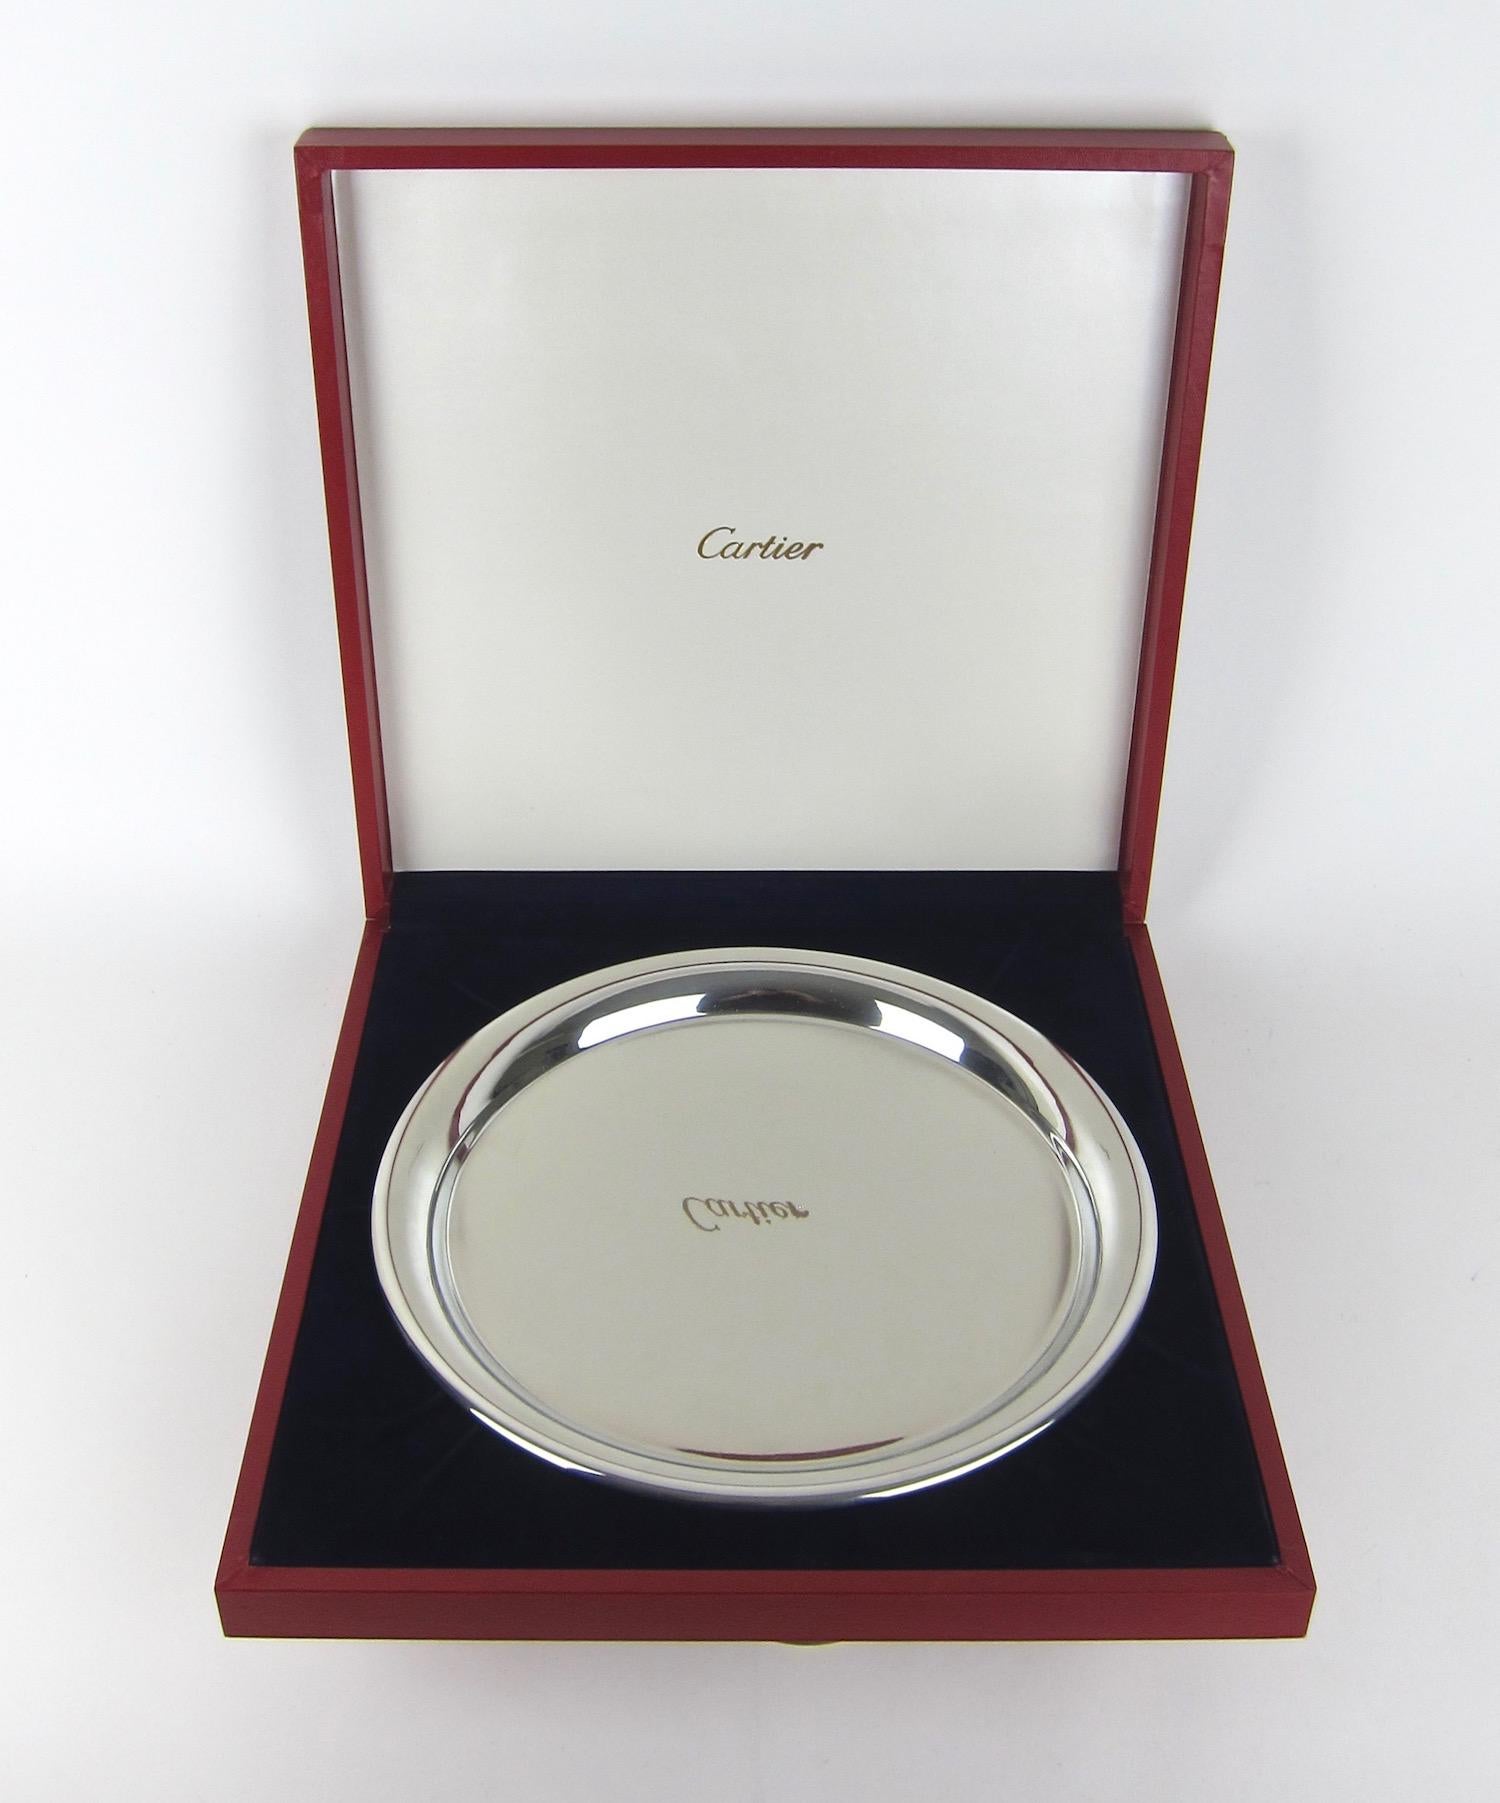 A vintage Cartier silver metal serving tray of highly polished and reflective pewter, made in France, circa 1977. The round tray has a sleek Minimalist design with a wire-wrapped rim and is stamped 